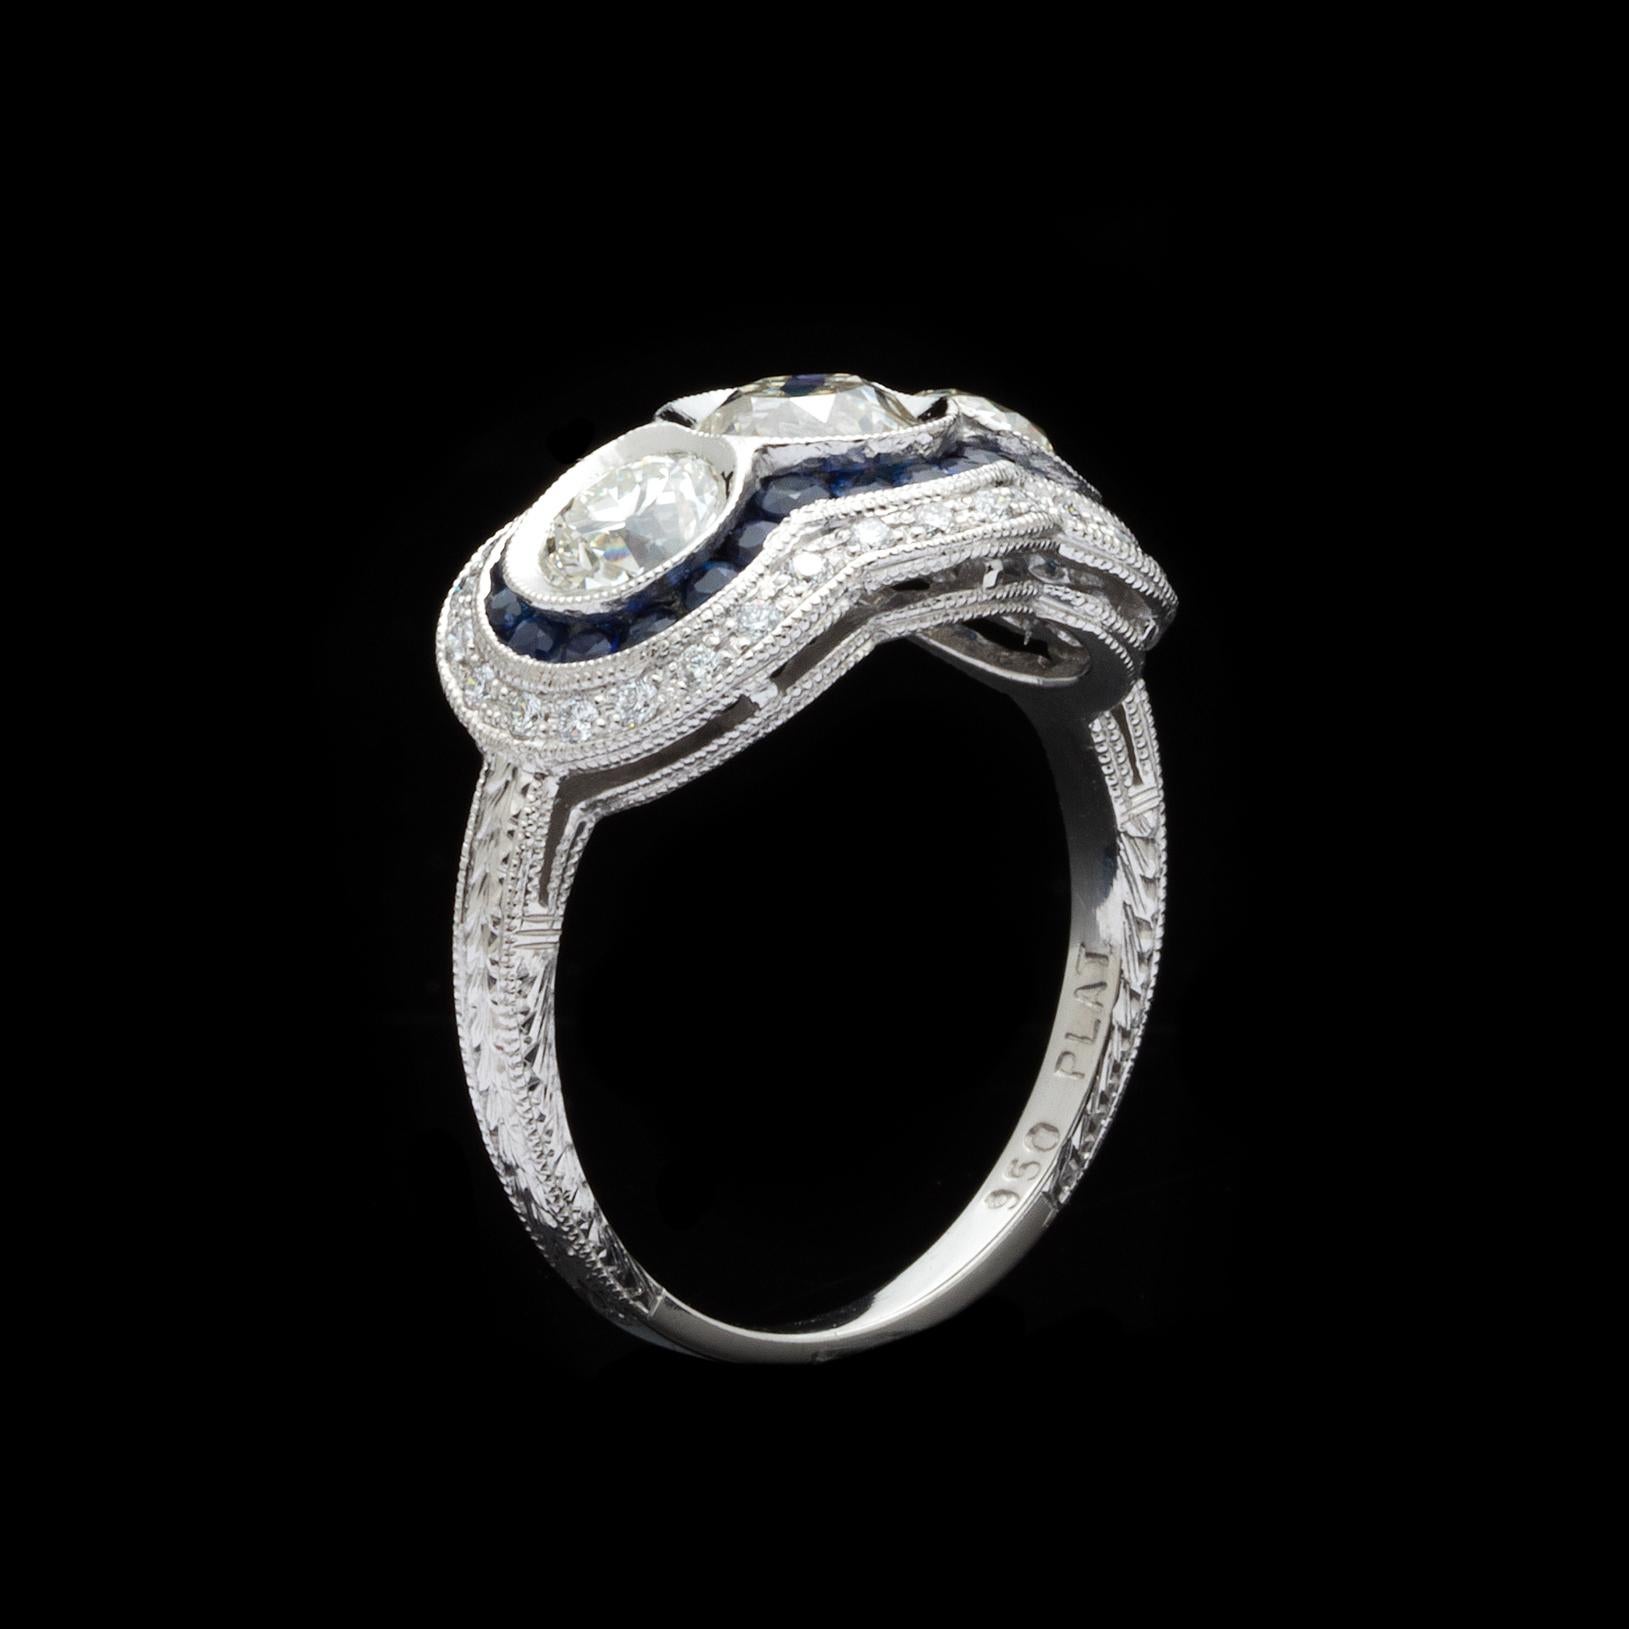 Platinum Edwardian style ring features 3 Old Euro cut diamonds totaling 1.14 carats. These diamonds are estimated as J/K color, and VS/SI clarity. Bordering the center stones is a halo of round cut blue sapphires totaling 0.48 carats, and 0.18